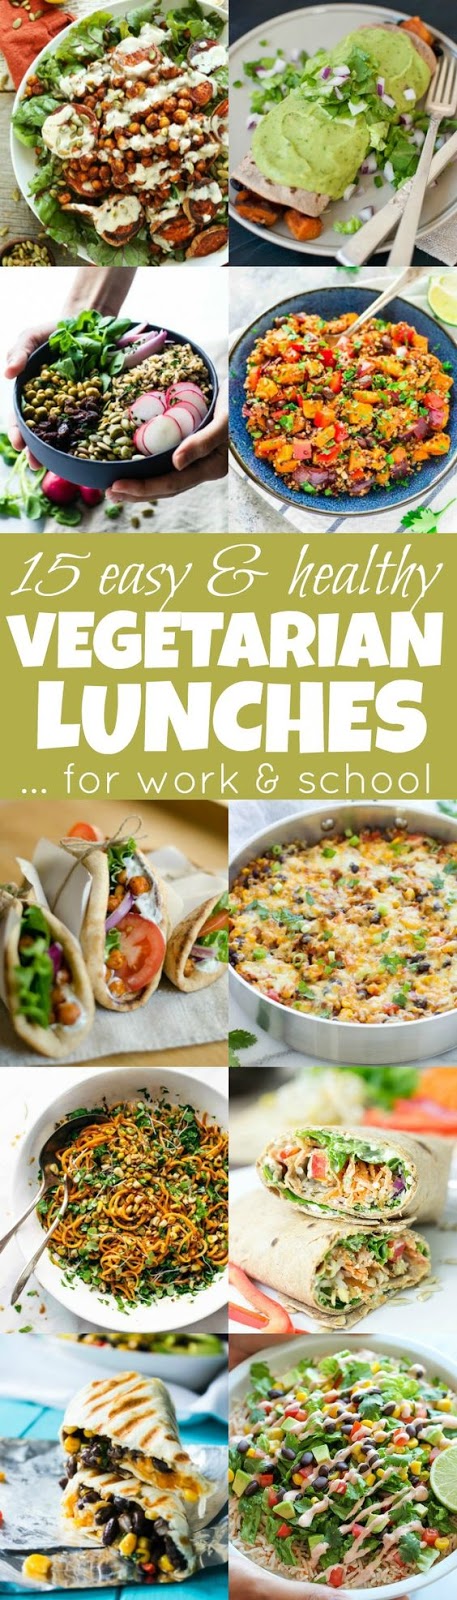 15 Easy & Healthy Vegetarian Lunches - Health Meal Prep Ideas